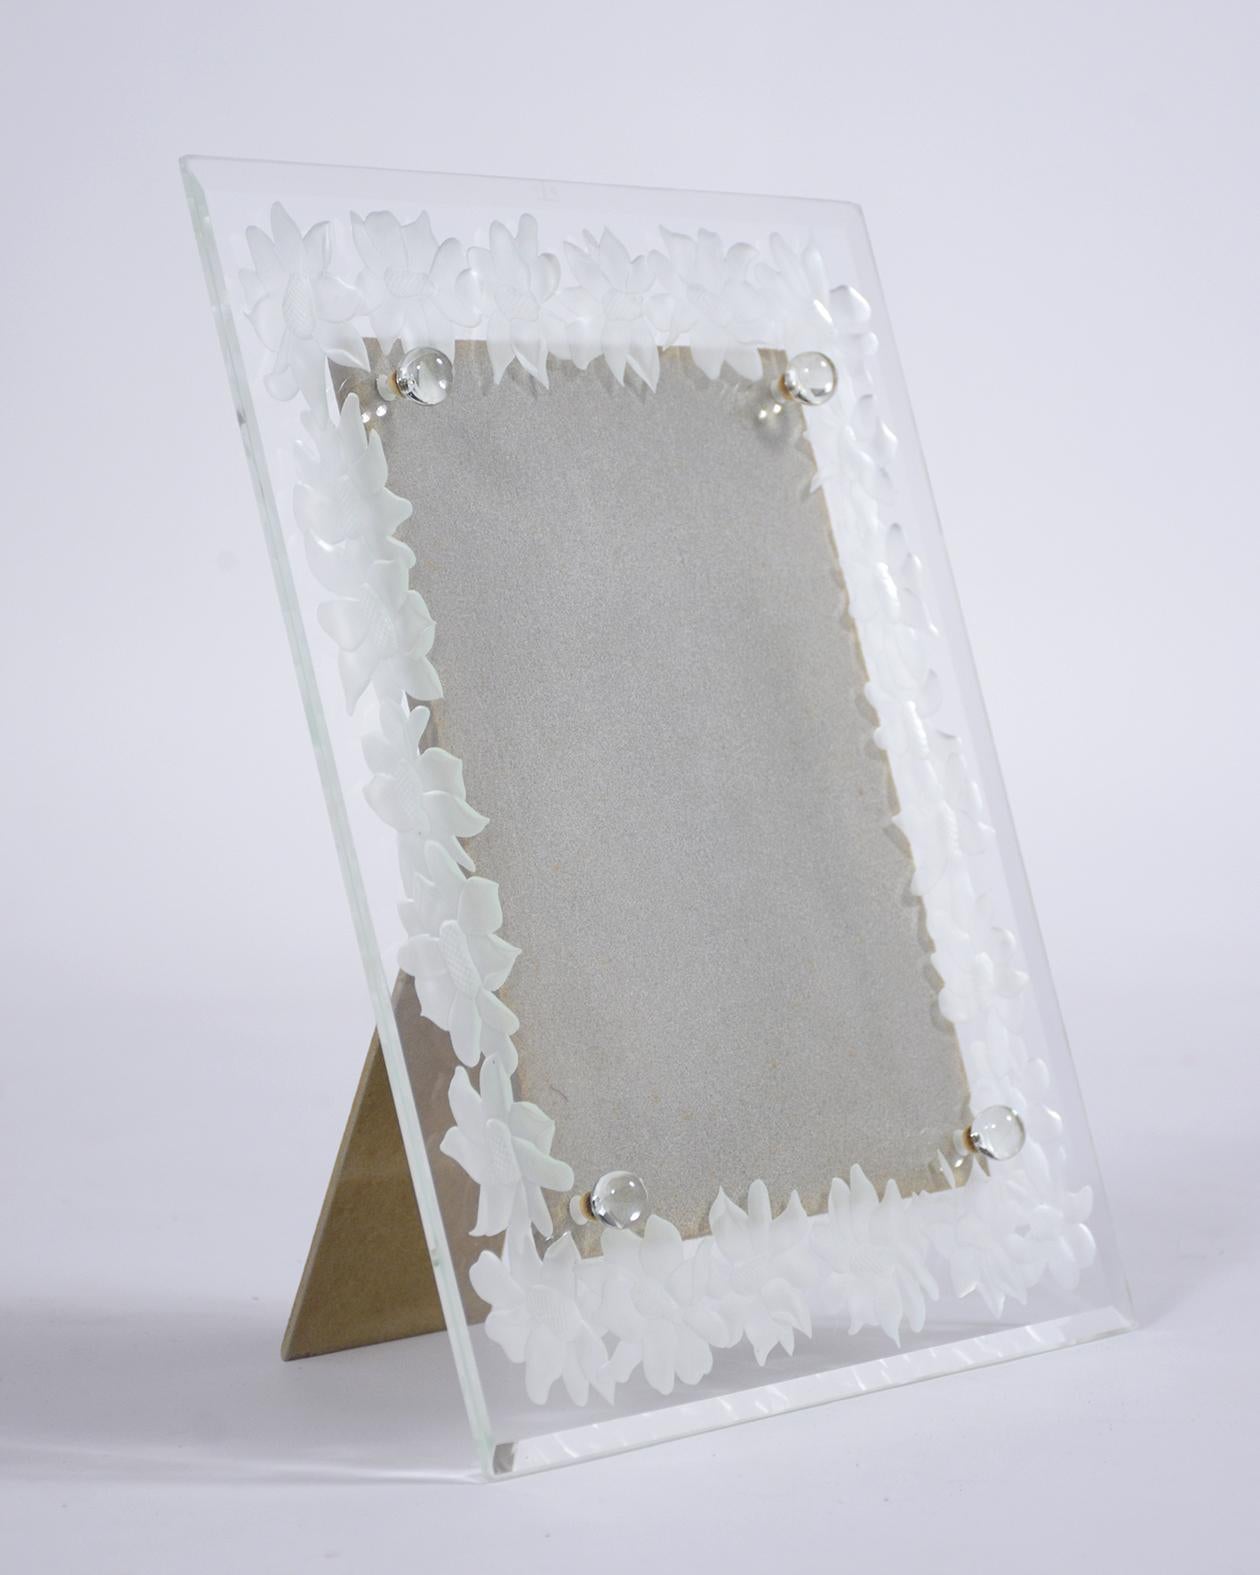 This late 19th-century glass portrait frame is in excellent condition and showcases an elegant glass frame with a beveled edge and glass etching depicting a beautiful floral border design. The stand is made out of wood and is very stable. This